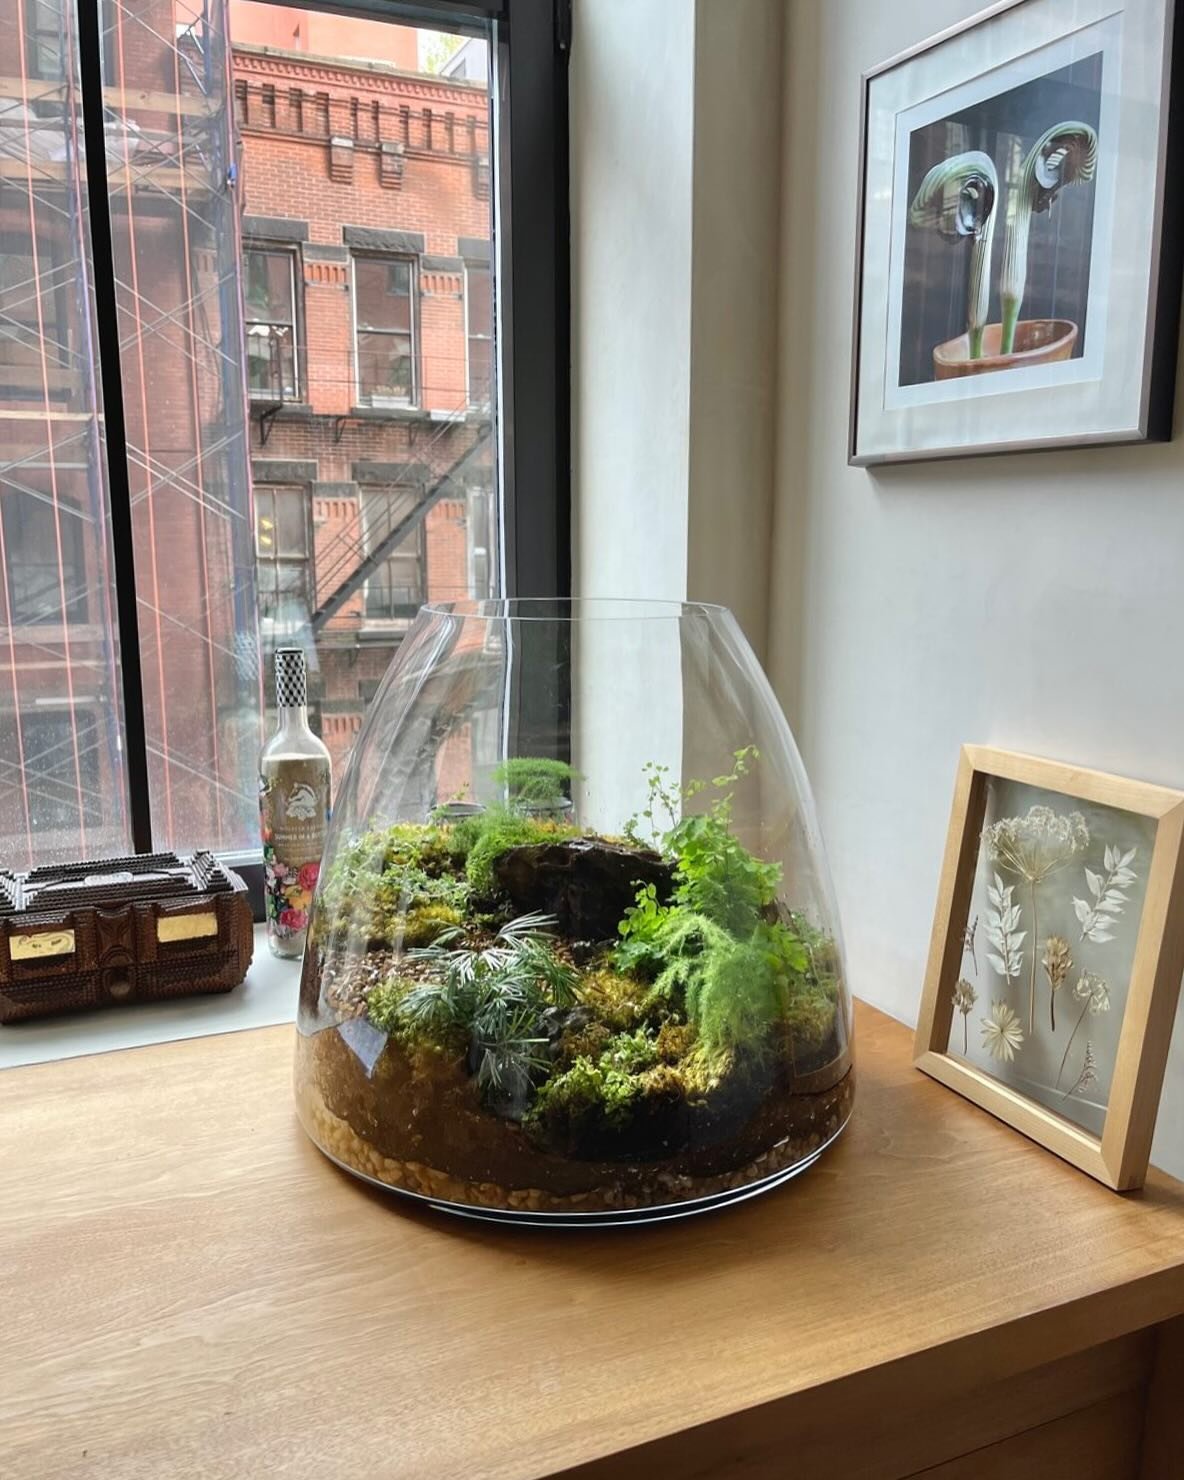 Crafting miniature landscapes within a single glass vessel is like capturing a world inside a bottle. We love the creative process of designing these scenes, whether it's a lush forest scape or a desert oasis. Each intricate detail draws you in, and 